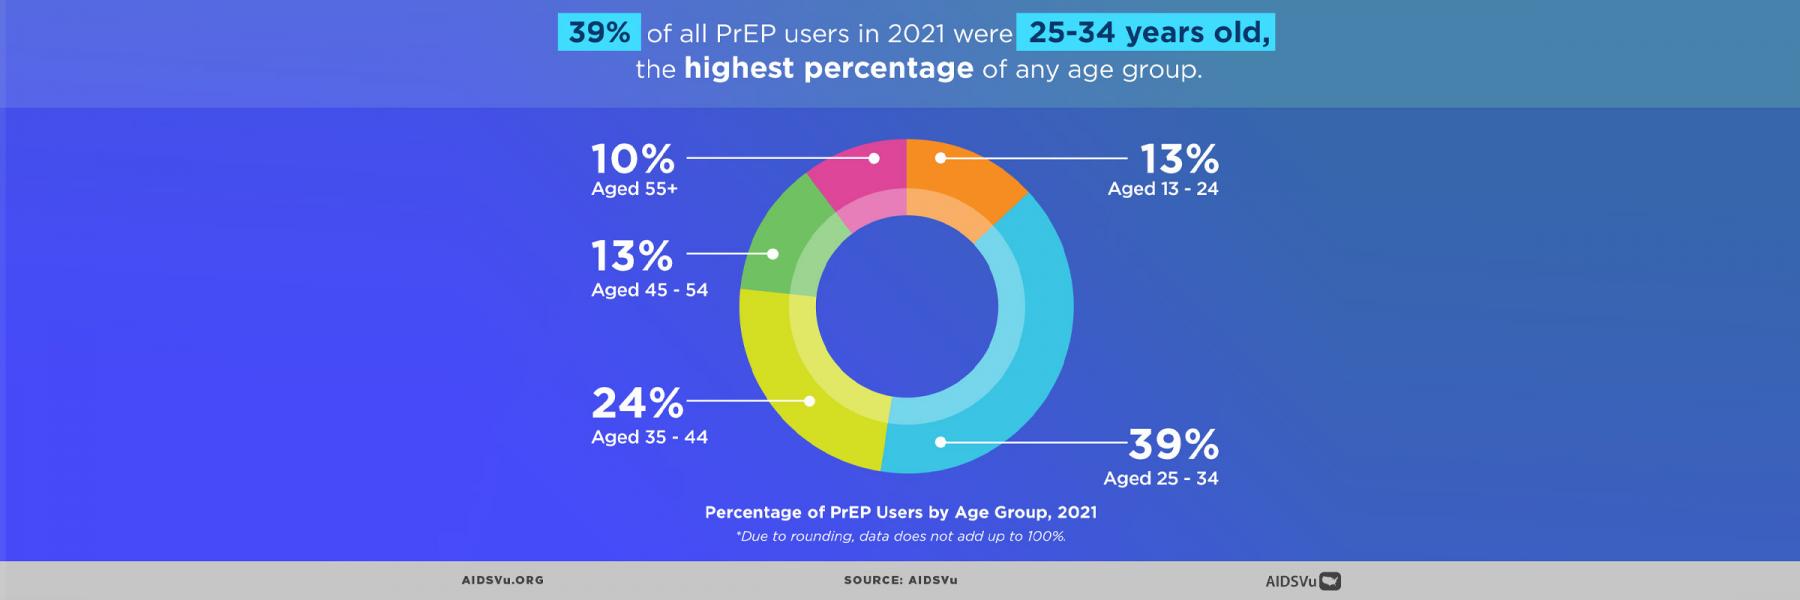 infographic depicting percentage of PrEP users by age group, 2021